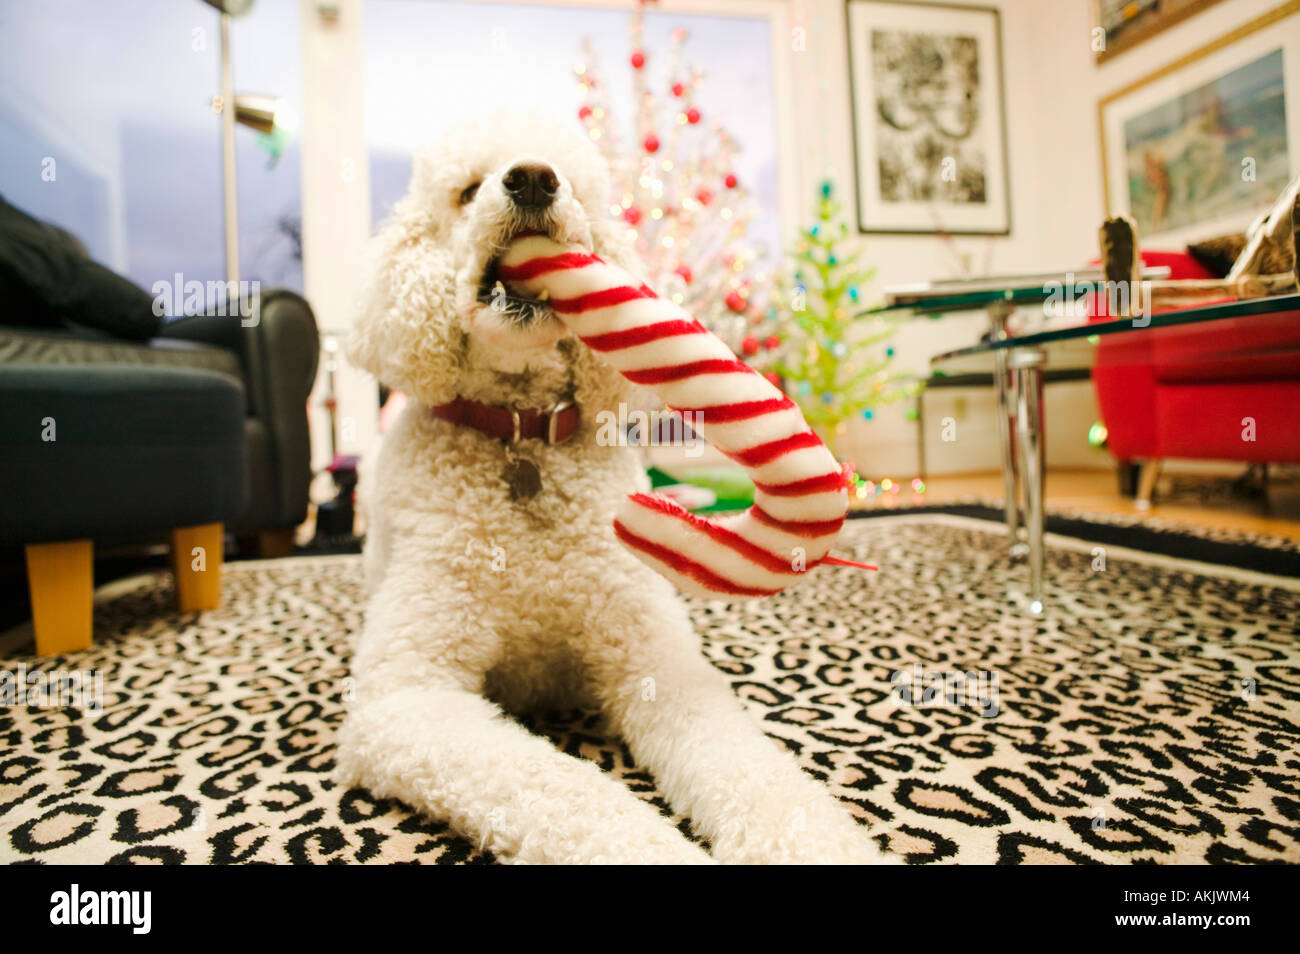 Poodle chewing on candy cane toy Stock Photo